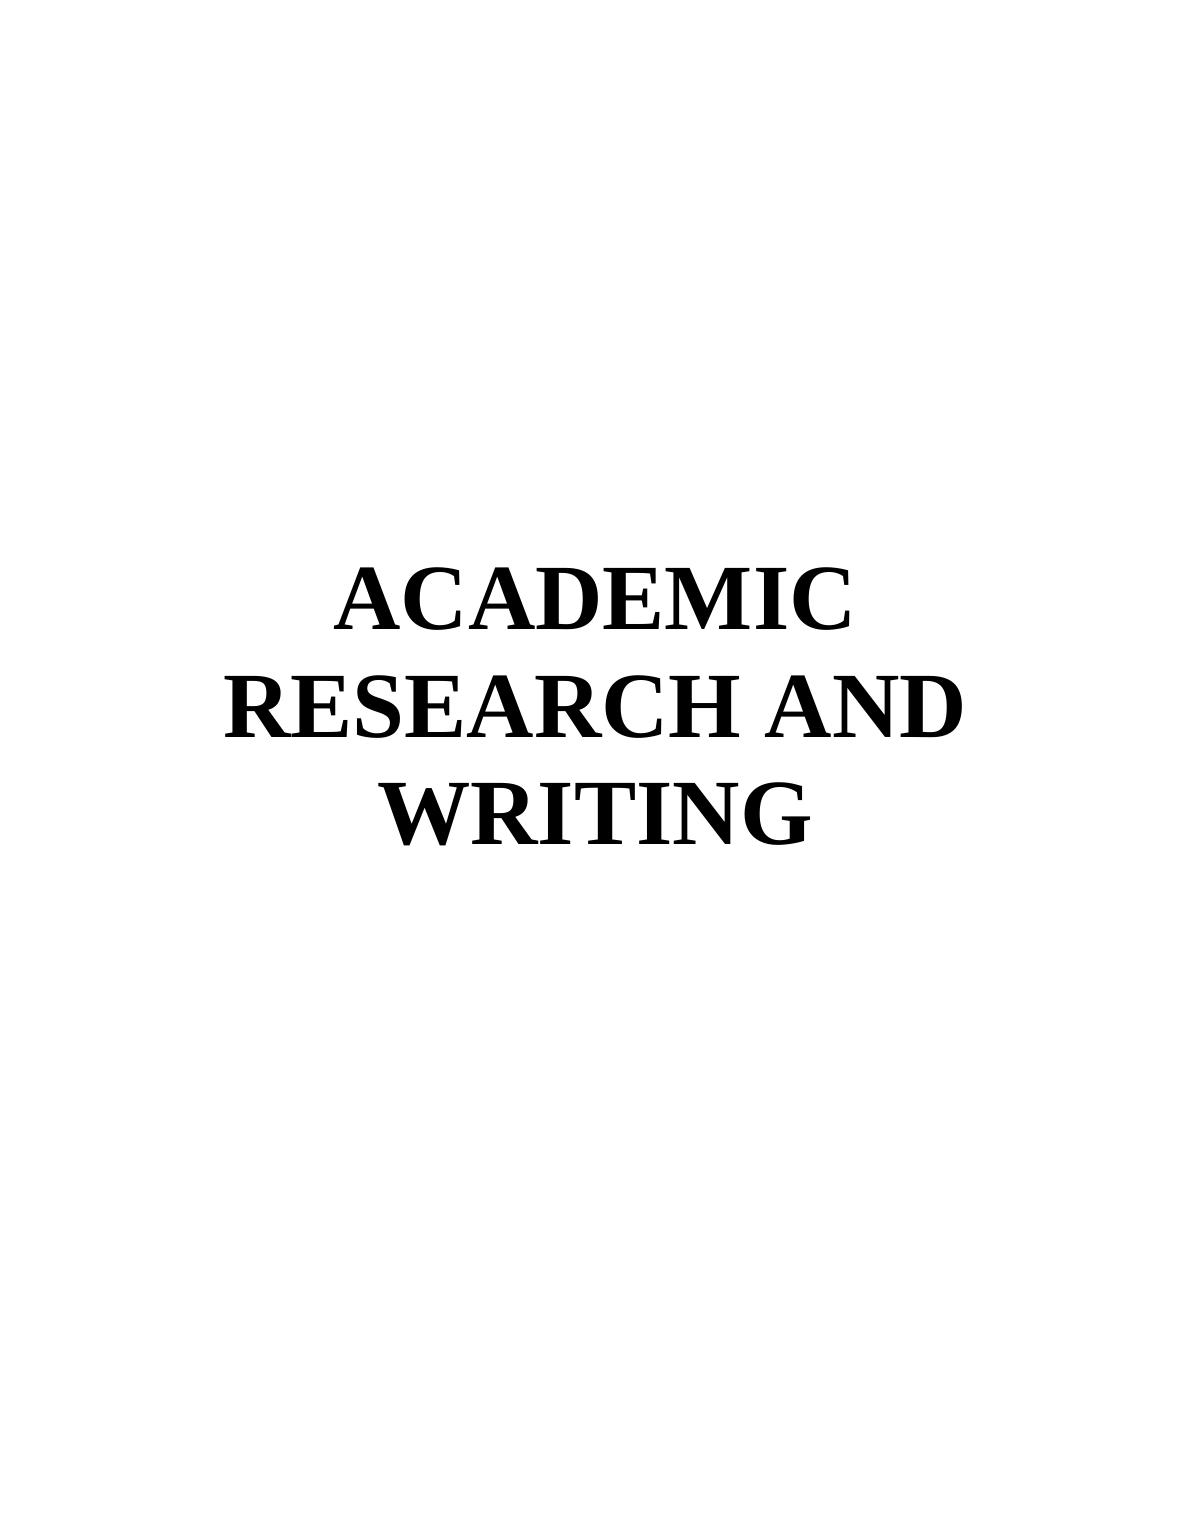 Academic Research and Writing_1